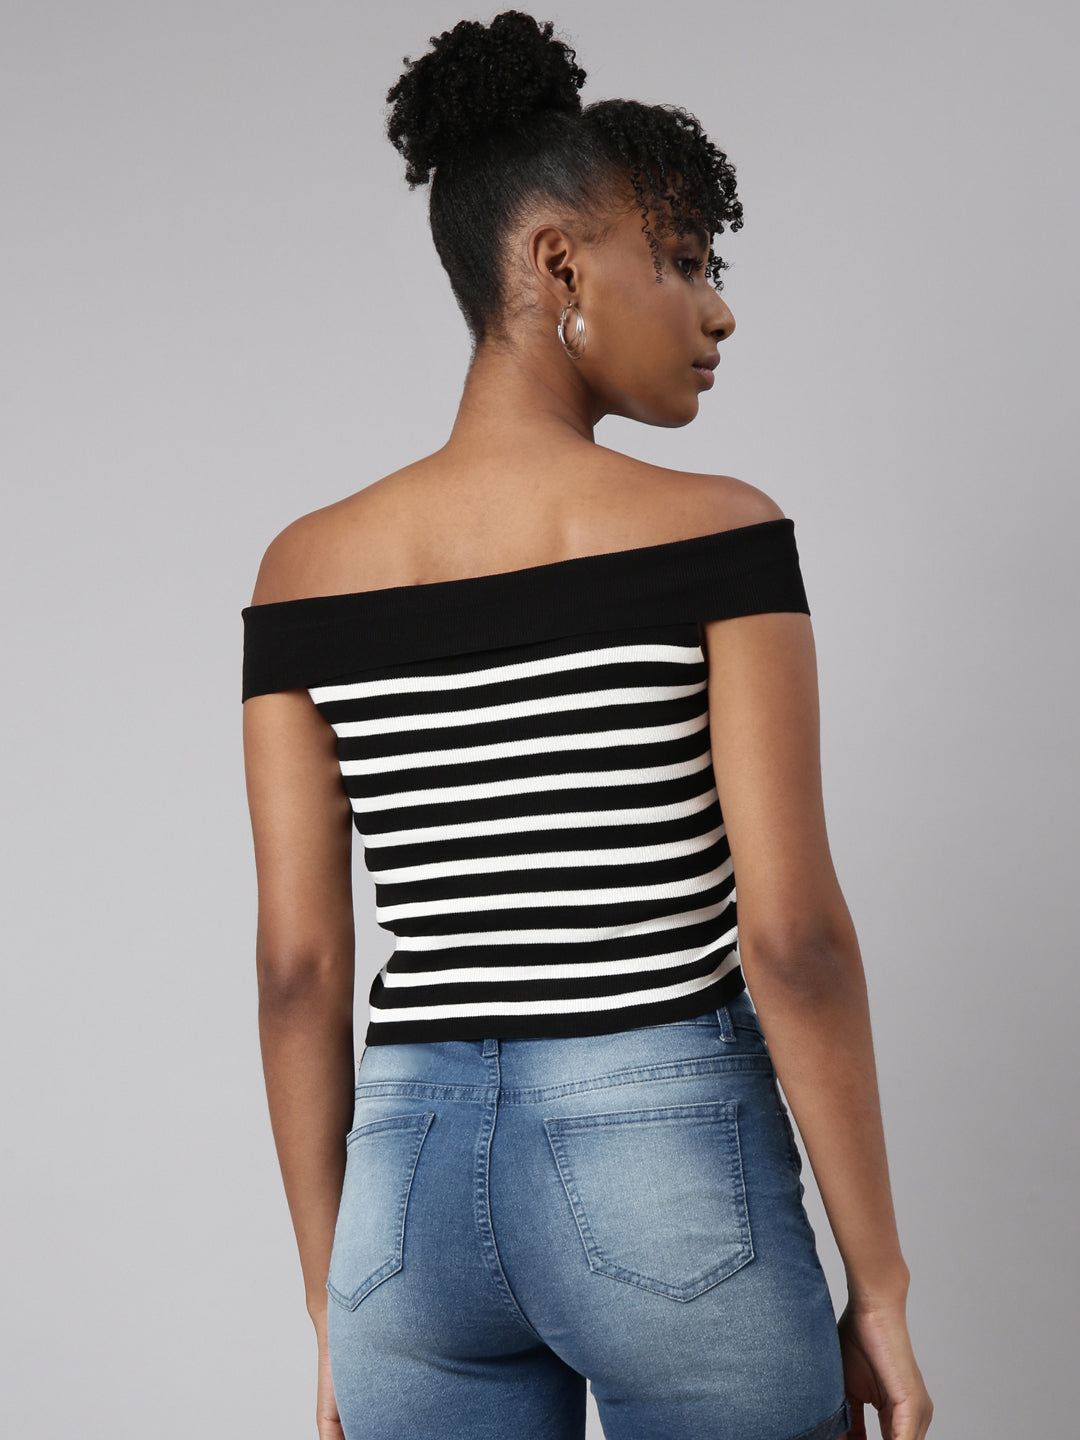 Women Black Horizontal Stripes Fitted Crop Top